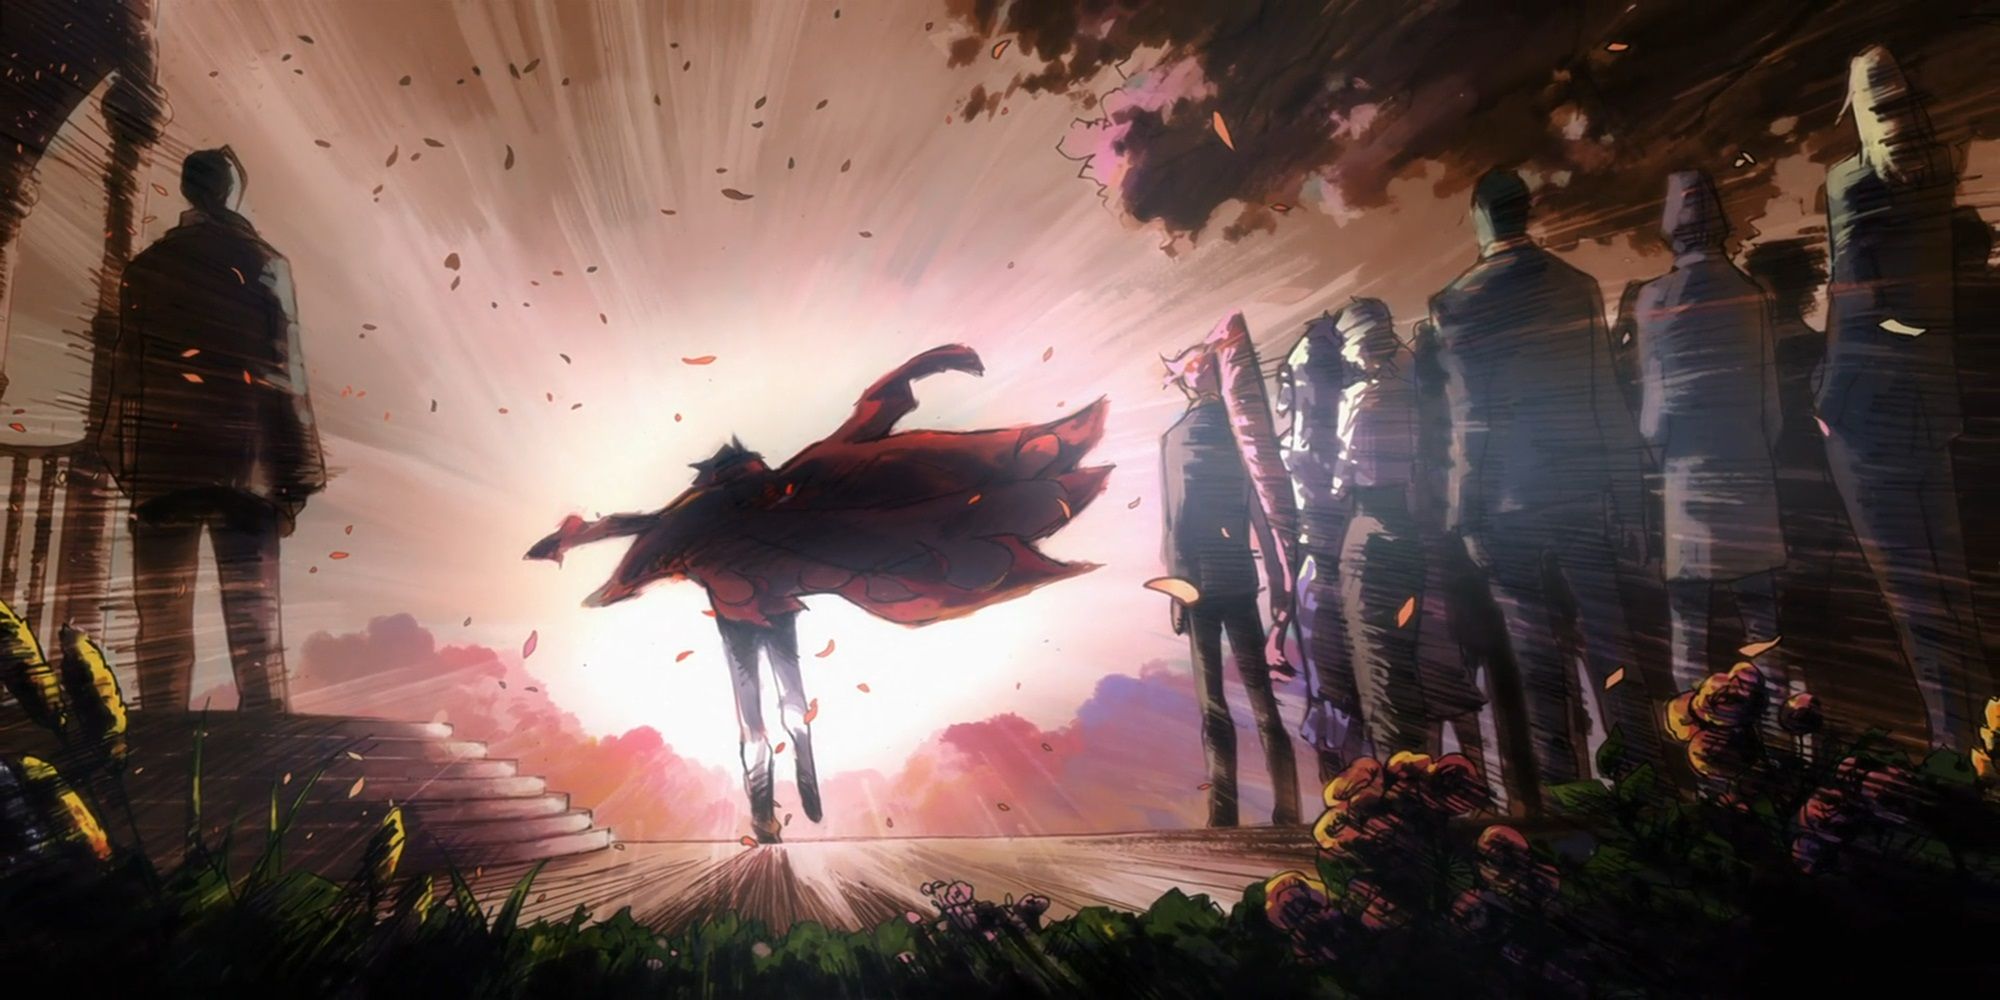 Tengen Toppa Gurren Lagann Final Scene depicting the main character with his back turned, walking away with his jacket flying behind him.